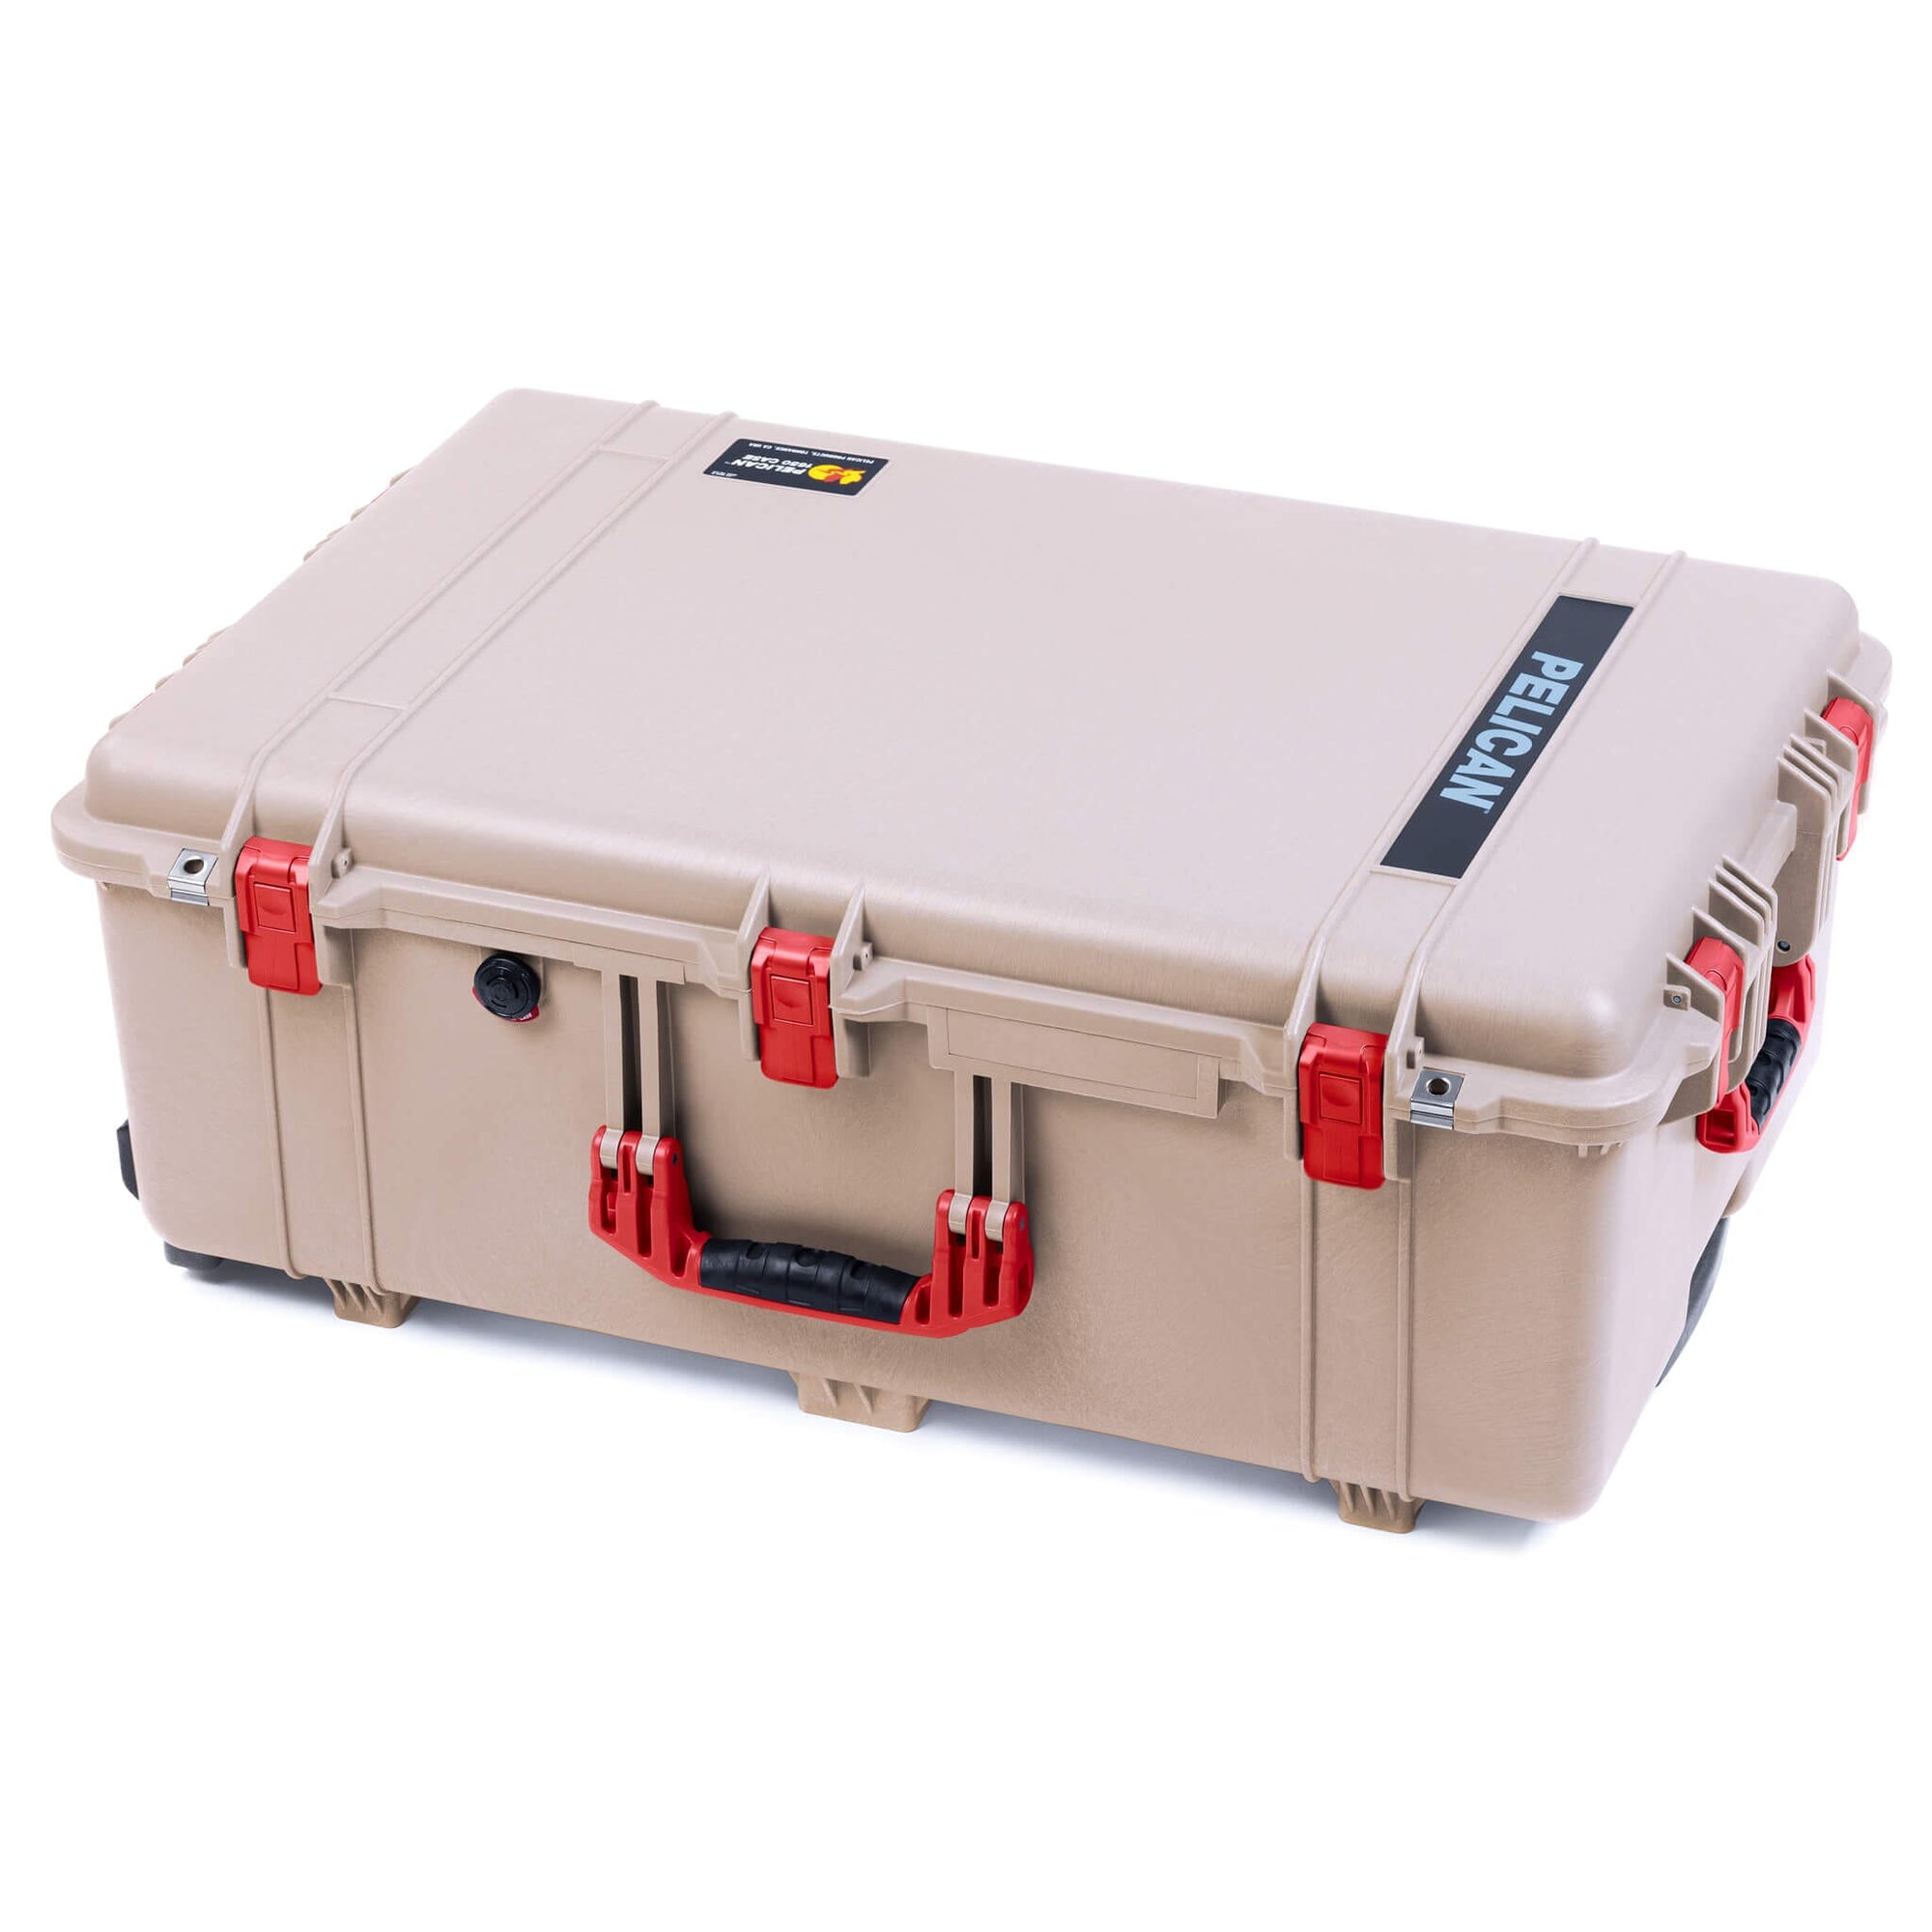 Pelican 1650 Case, Desert Tan with Red Handles & Push-Button Latches ColorCase 